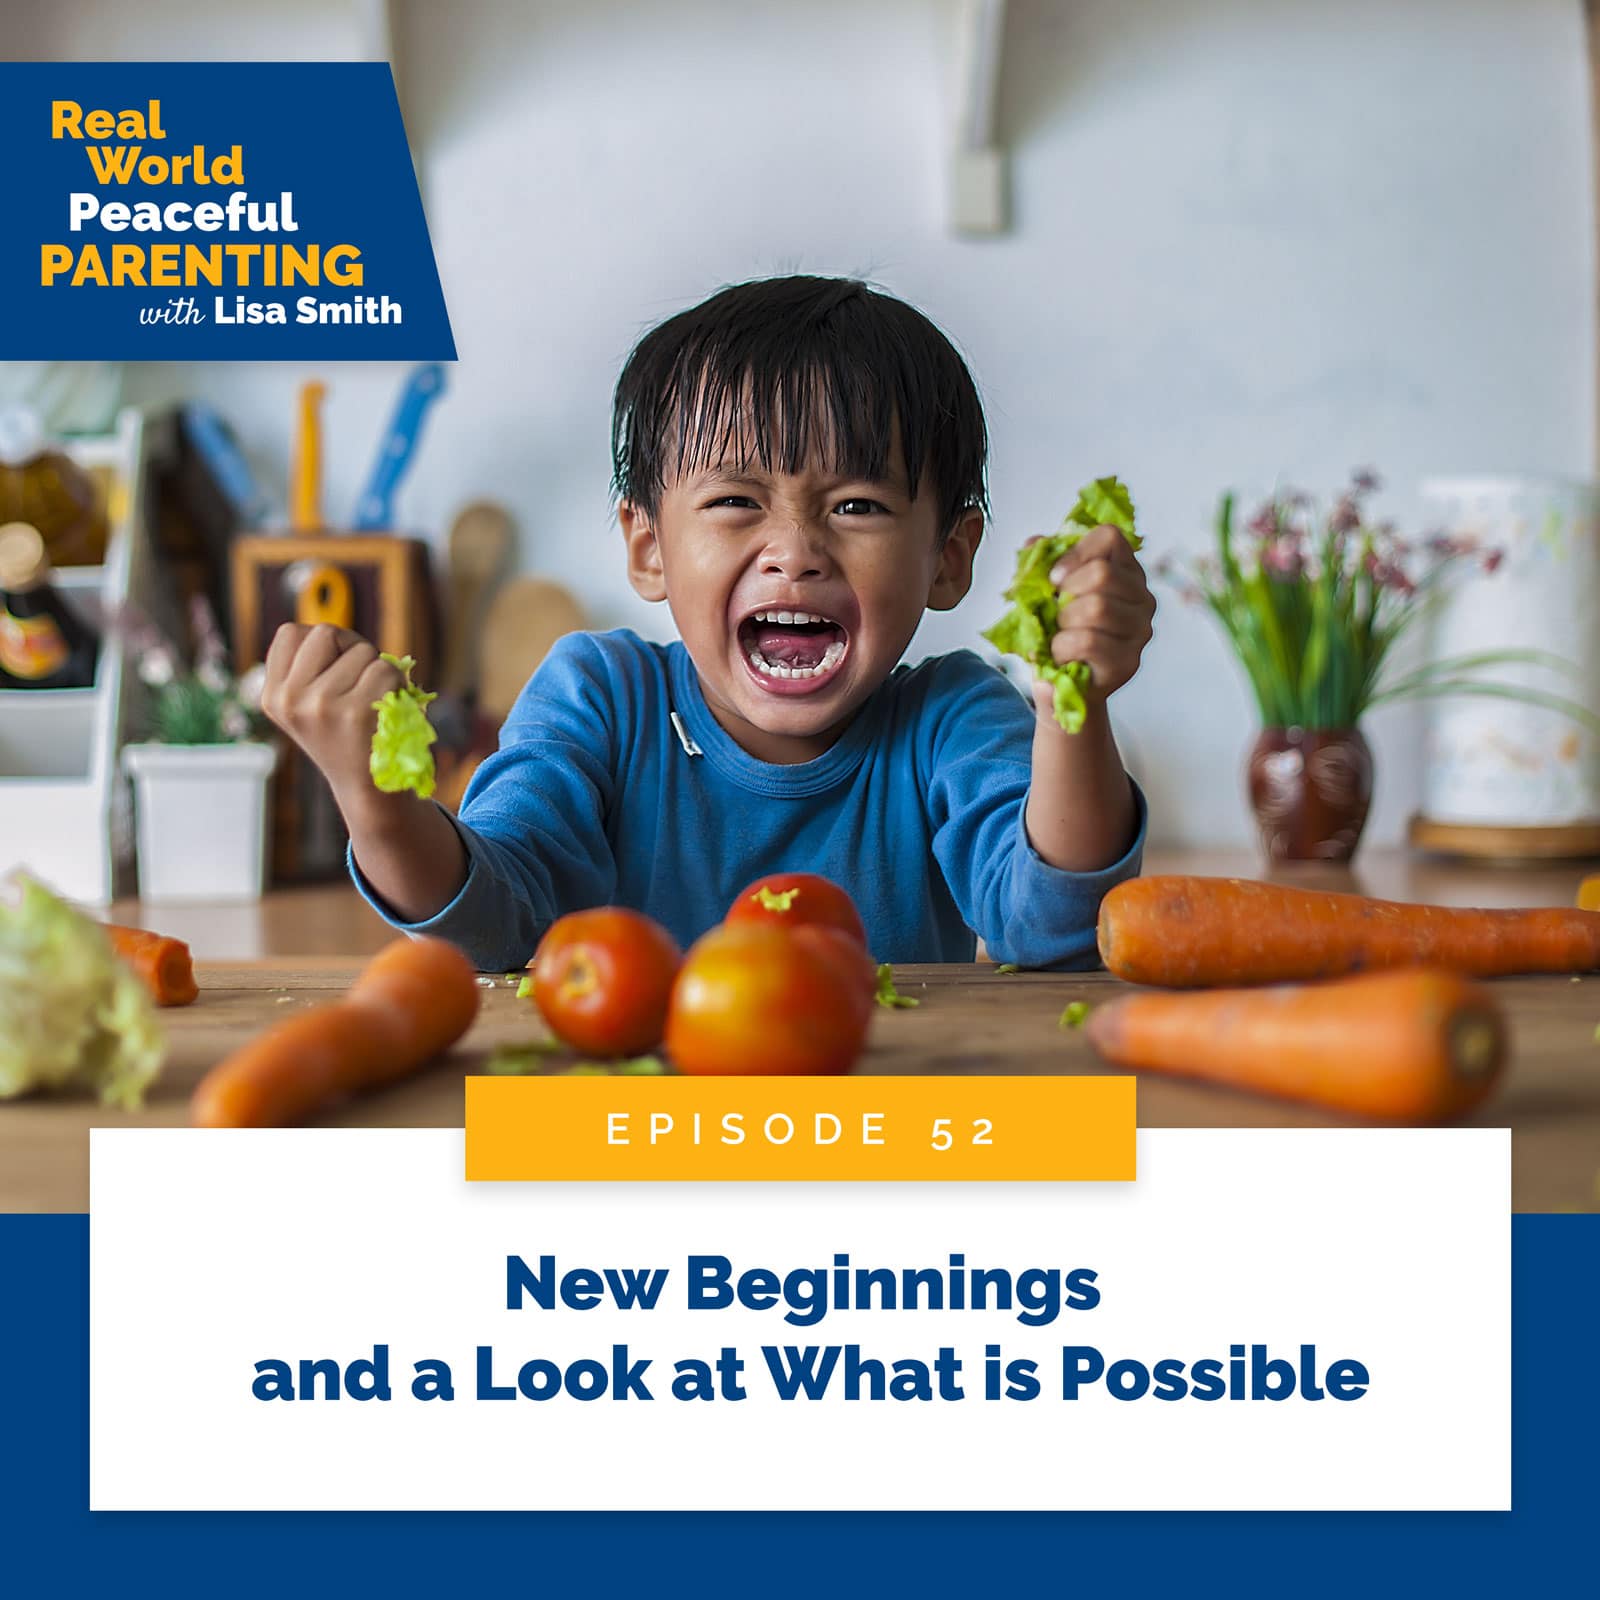 Real World Peaceful Parenting with Lisa Smith | New Beginnings and a Look at What is Possible